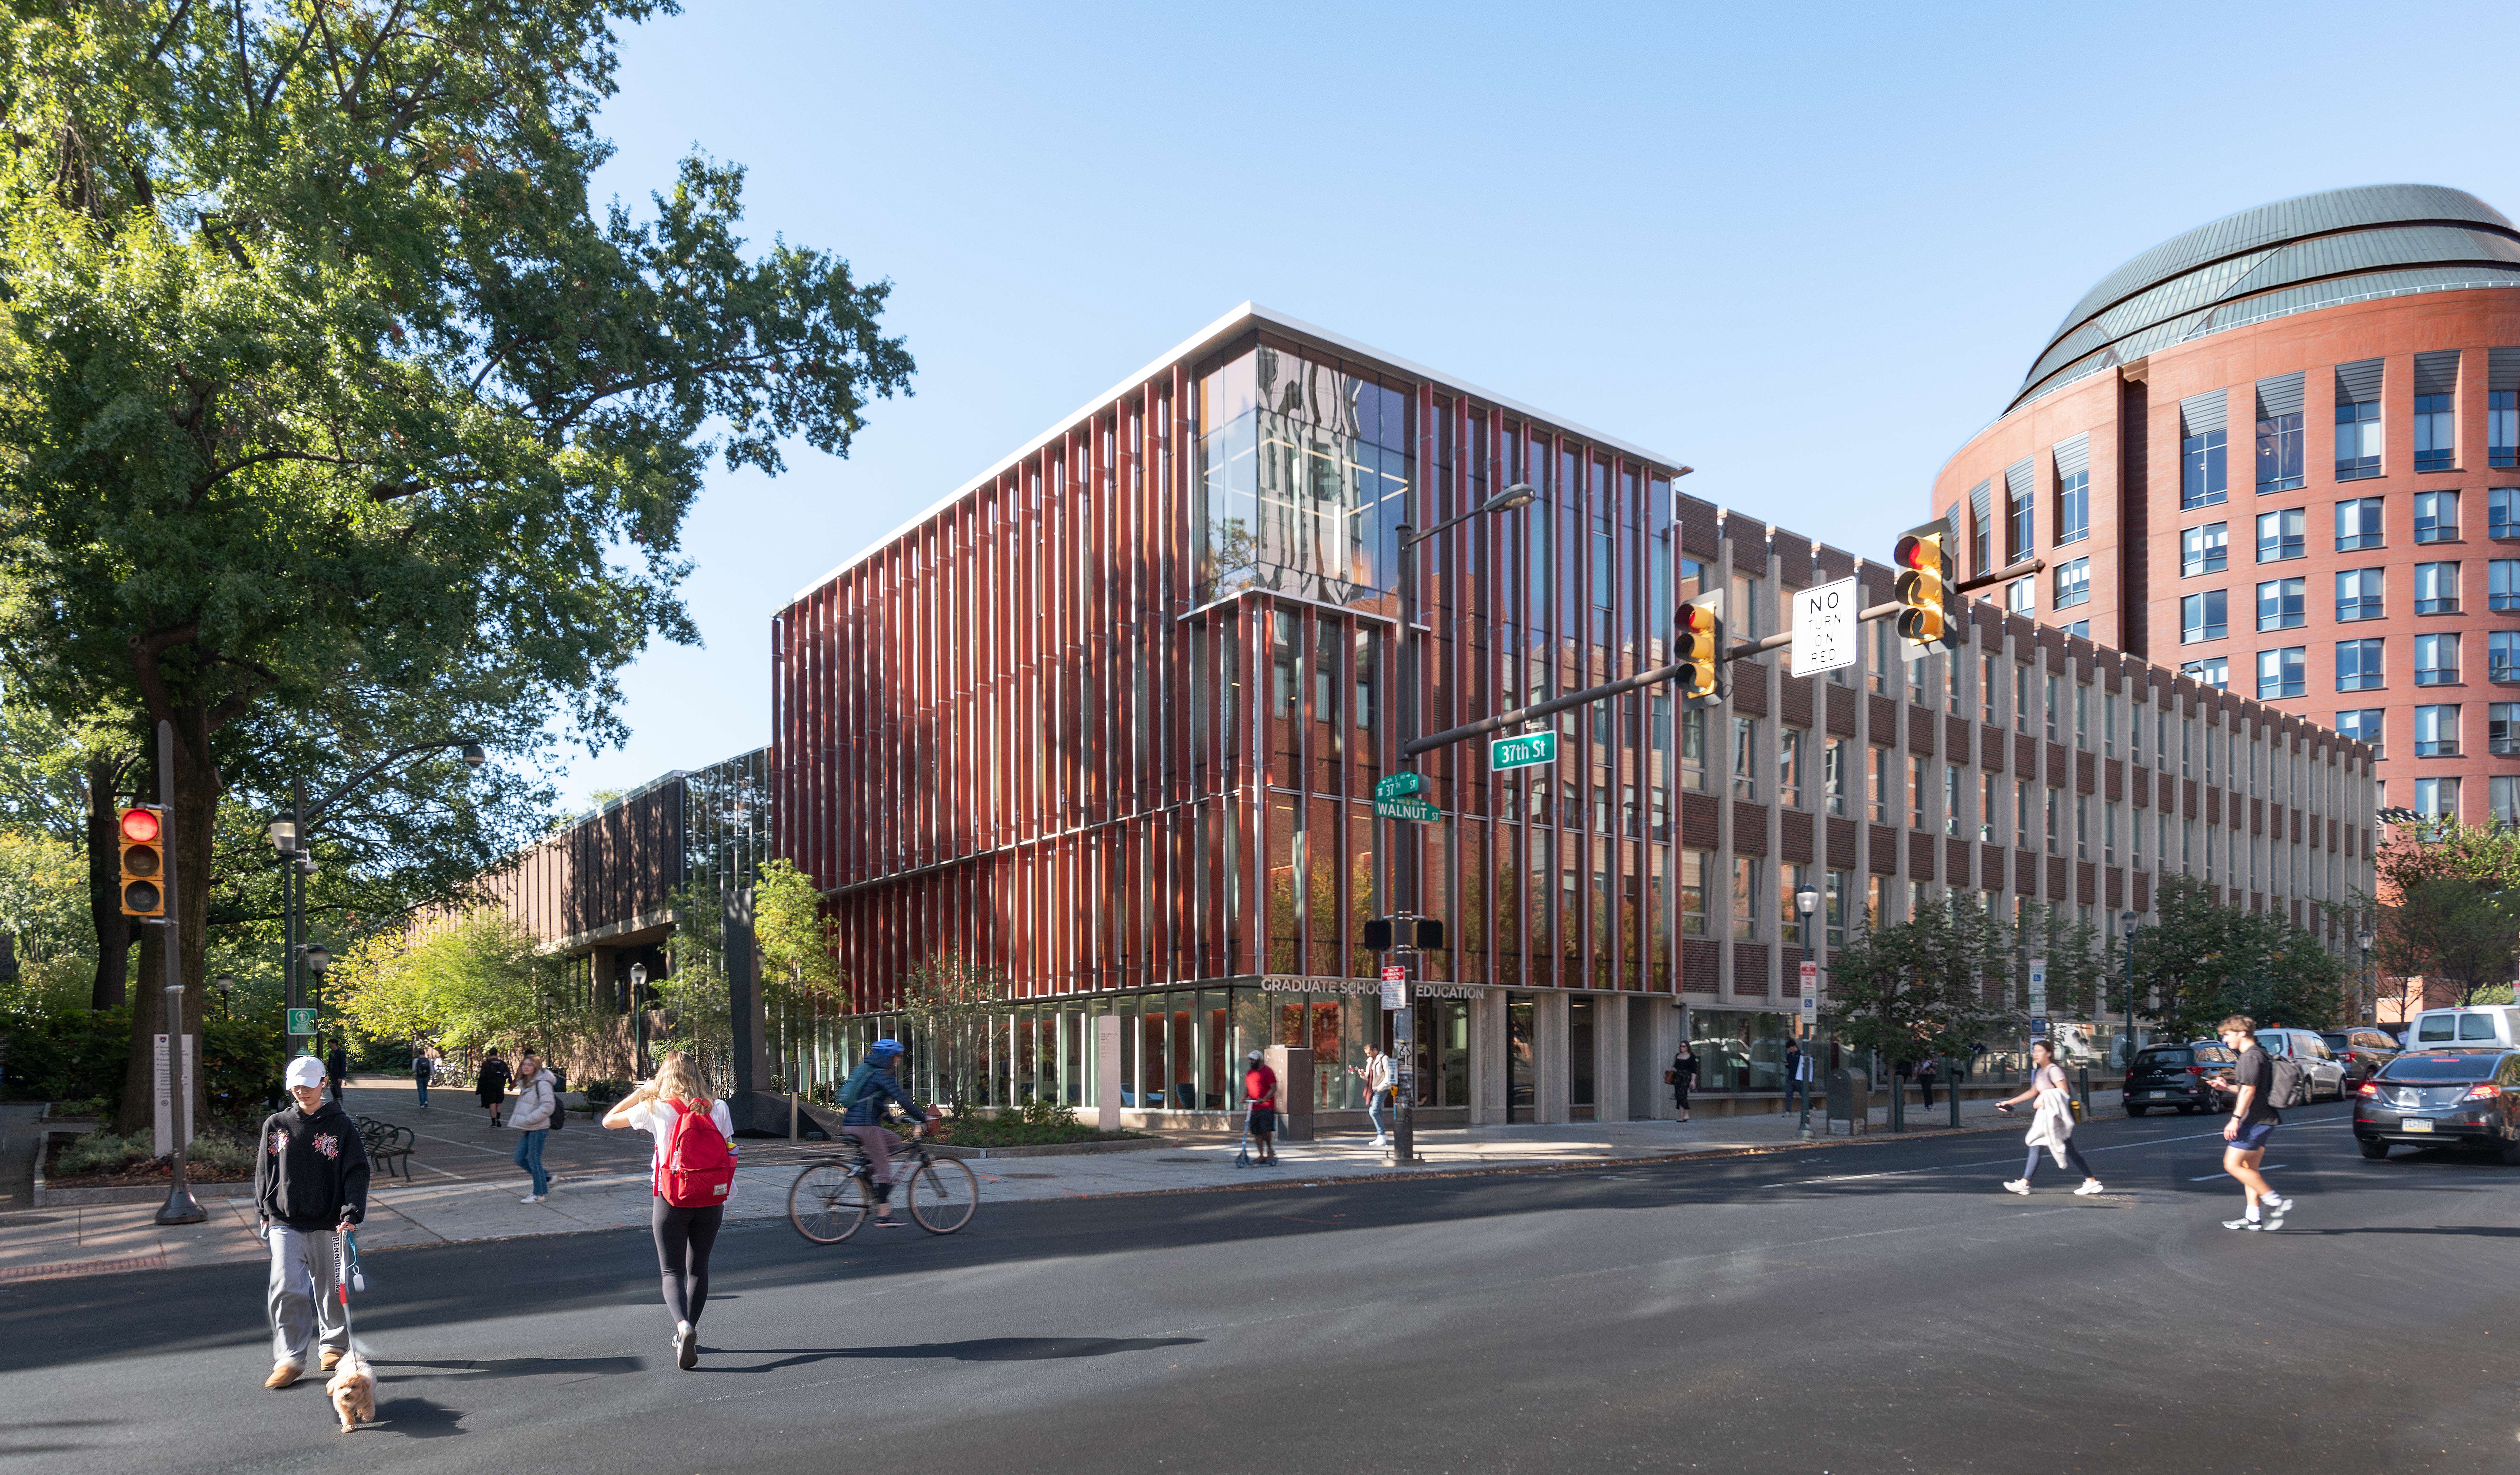 P. Agnes Completes the University of Pennsylvania Graduate School of Education Expansion and Renovation Project